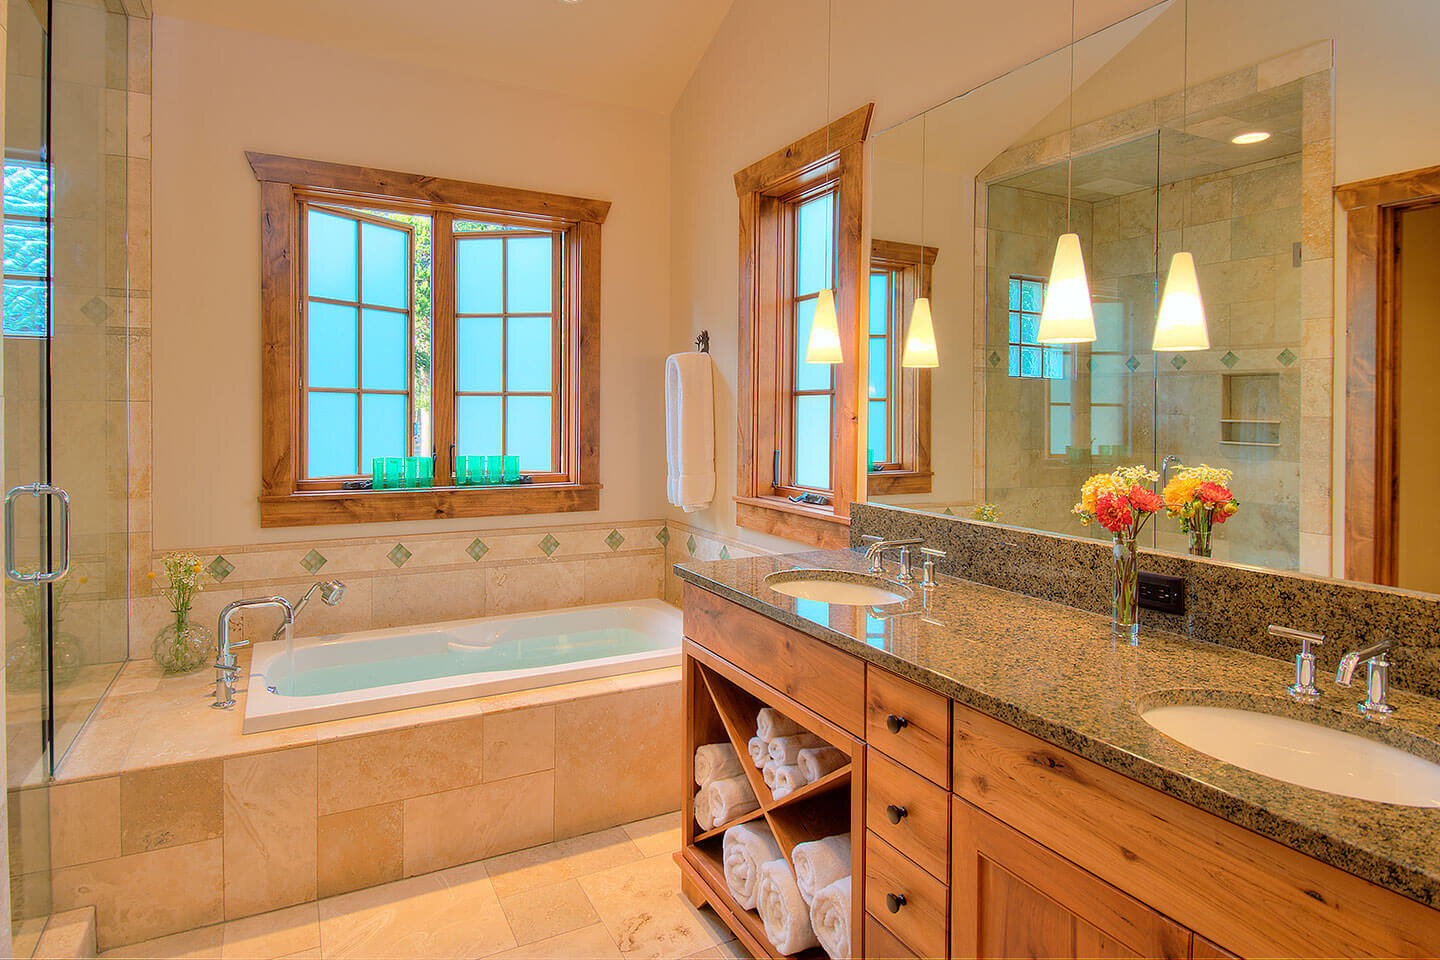 Bathroom with granite counter top and travertine stone